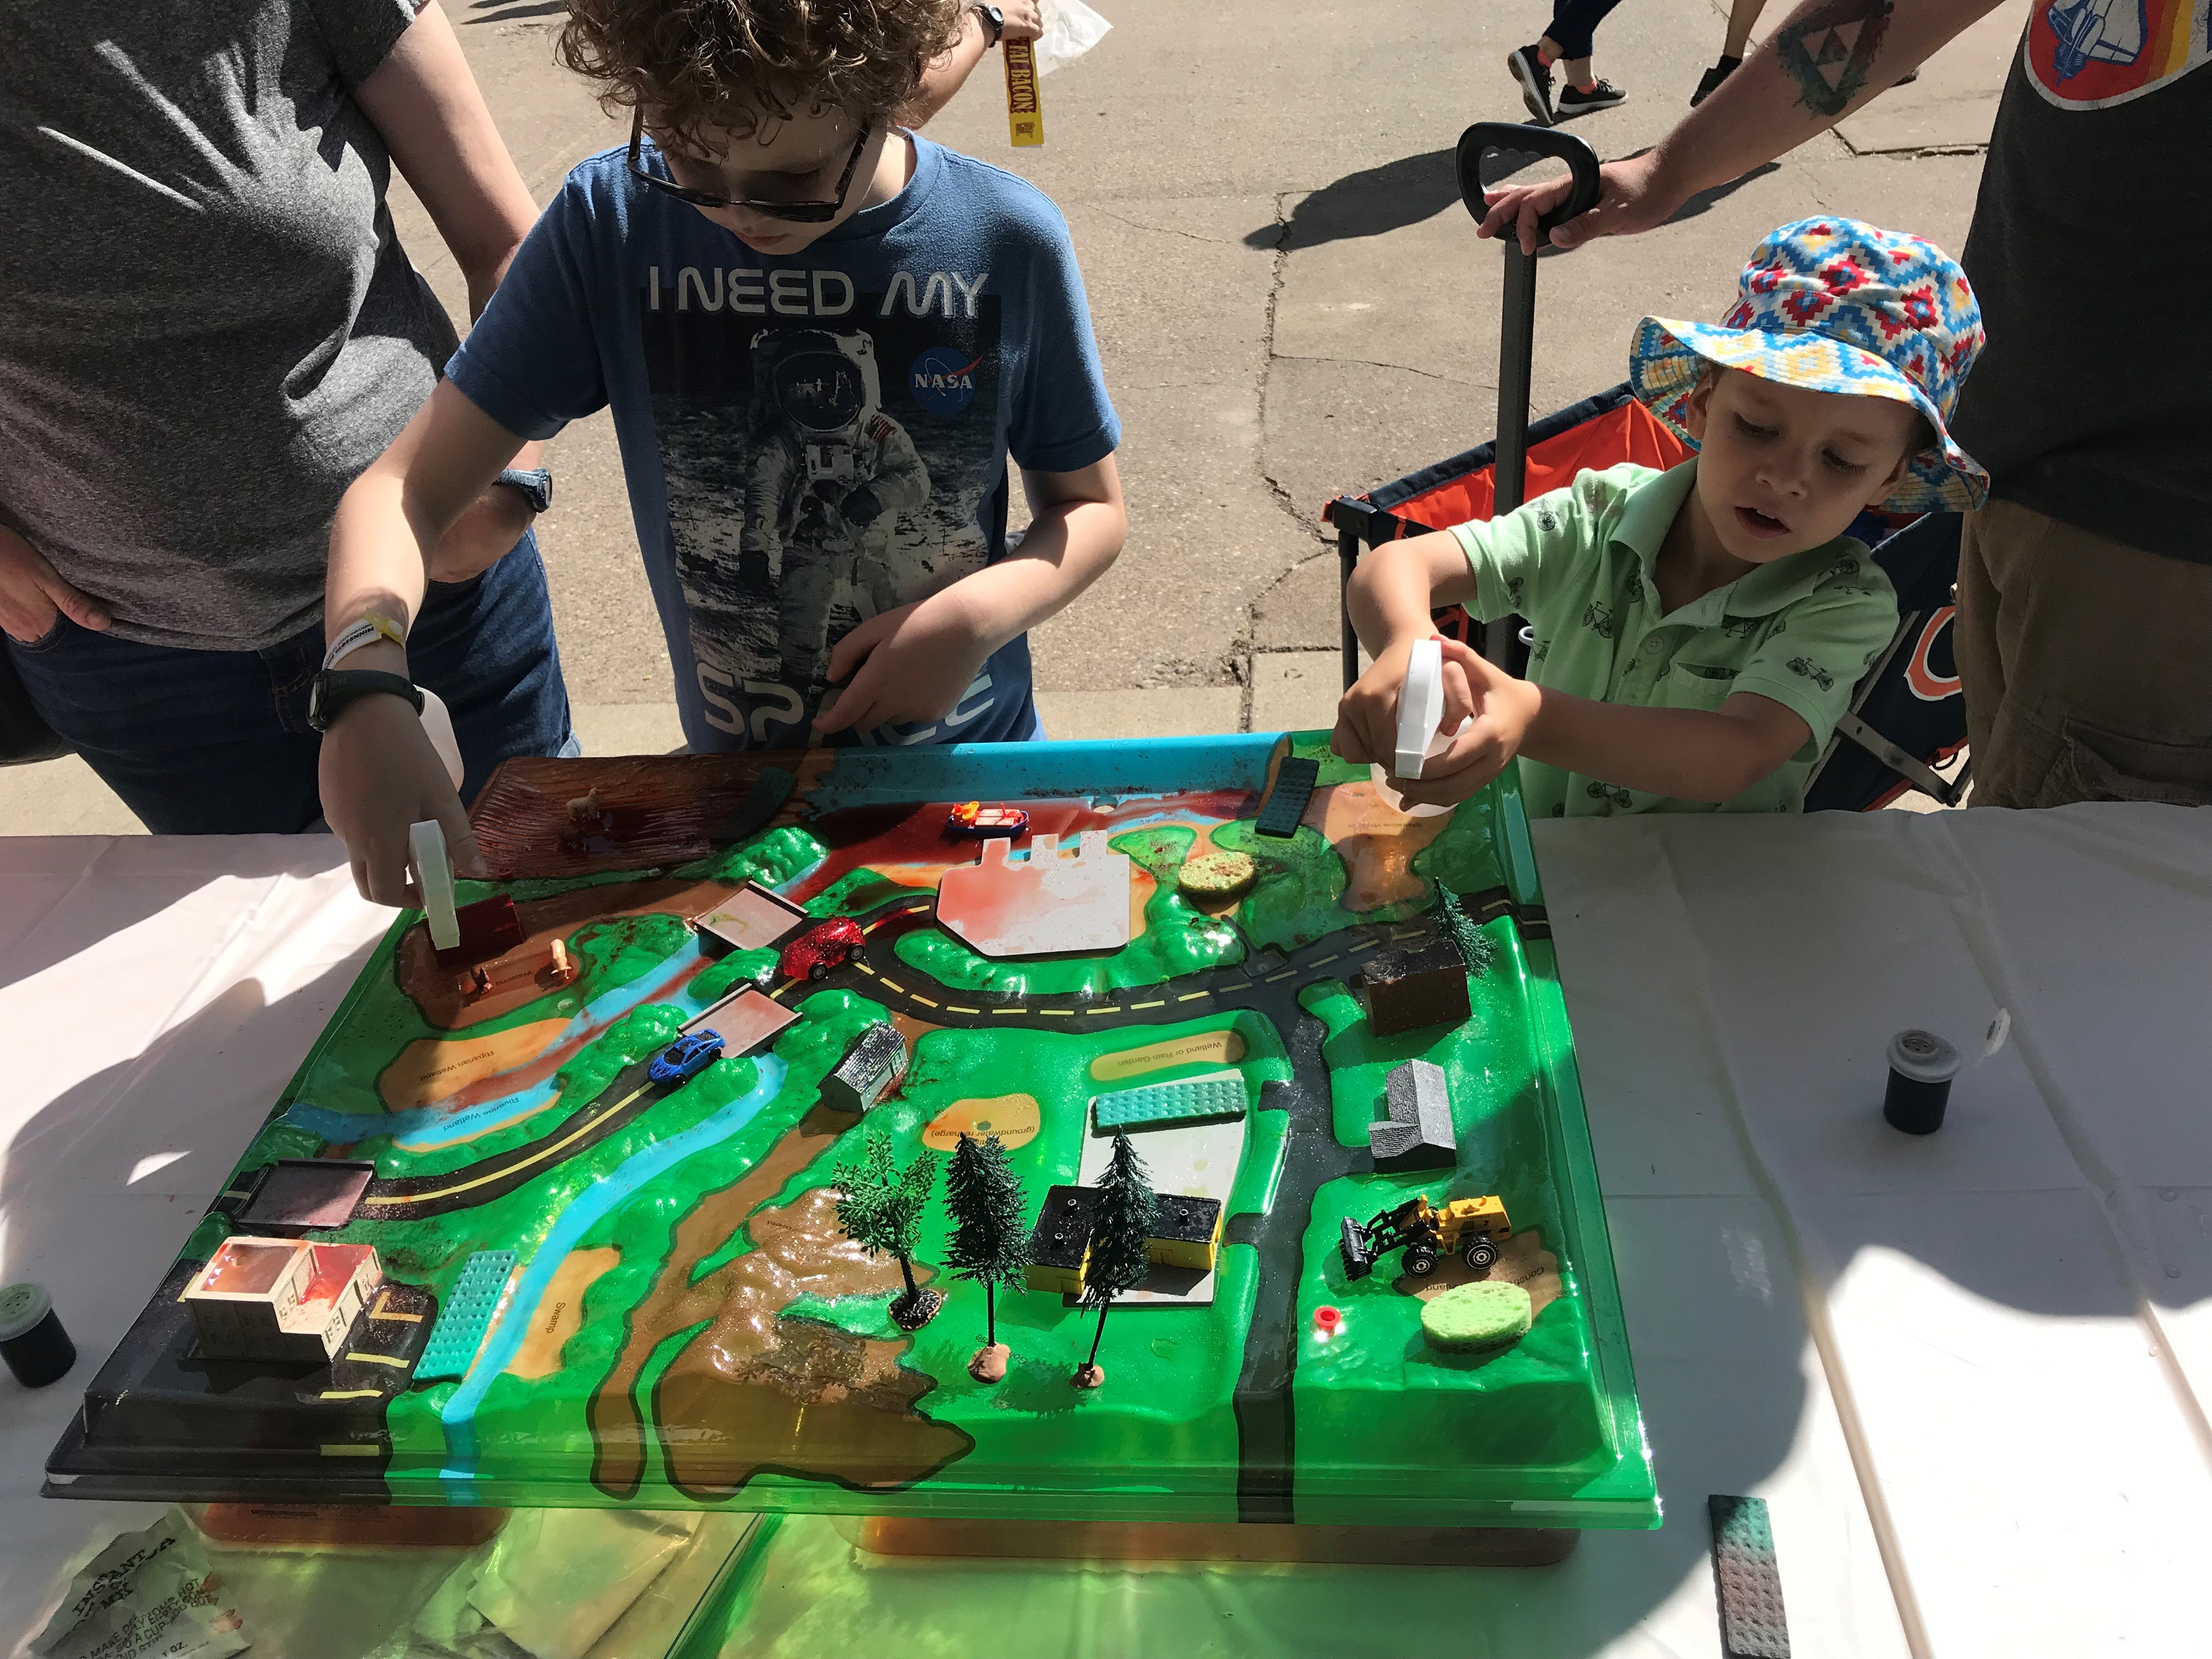 2019 STEM Day at the MN State Fair